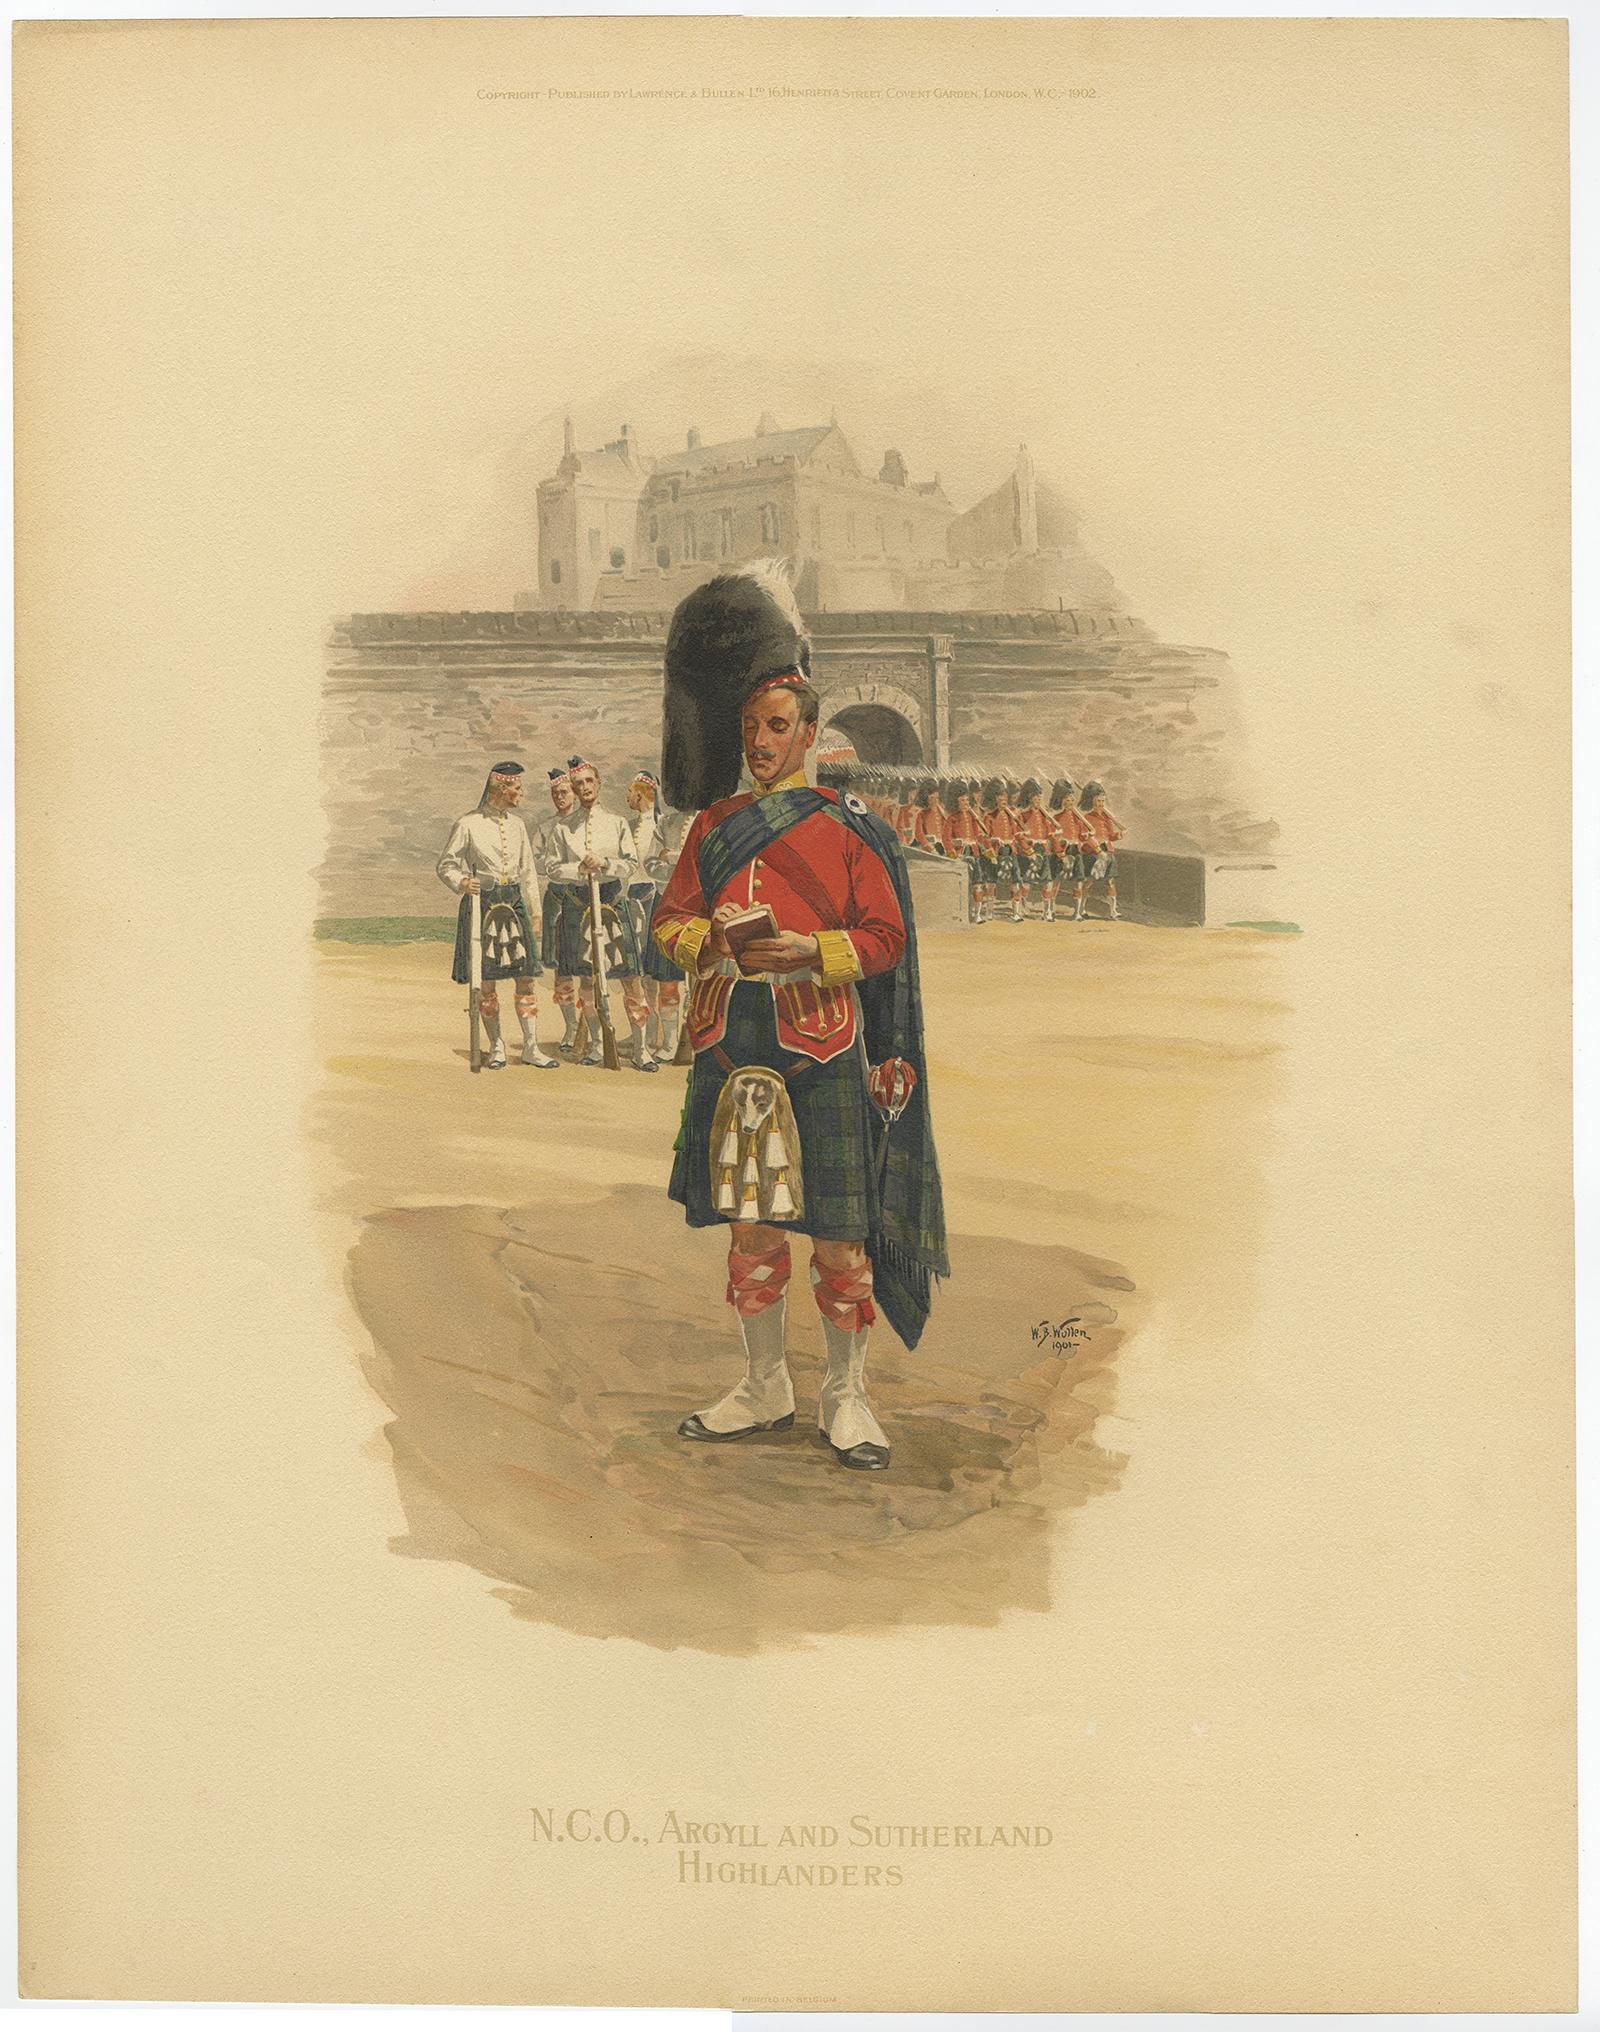 Description: Antique print, titled: 'N. C. O. Argyll and Sutherland Highlanders.' 

The Argyll and Sutherland Highlanders (Princess Louise's) was a line infantry regiment of the British Army that existed from 1881 until amalgamation into the Royal